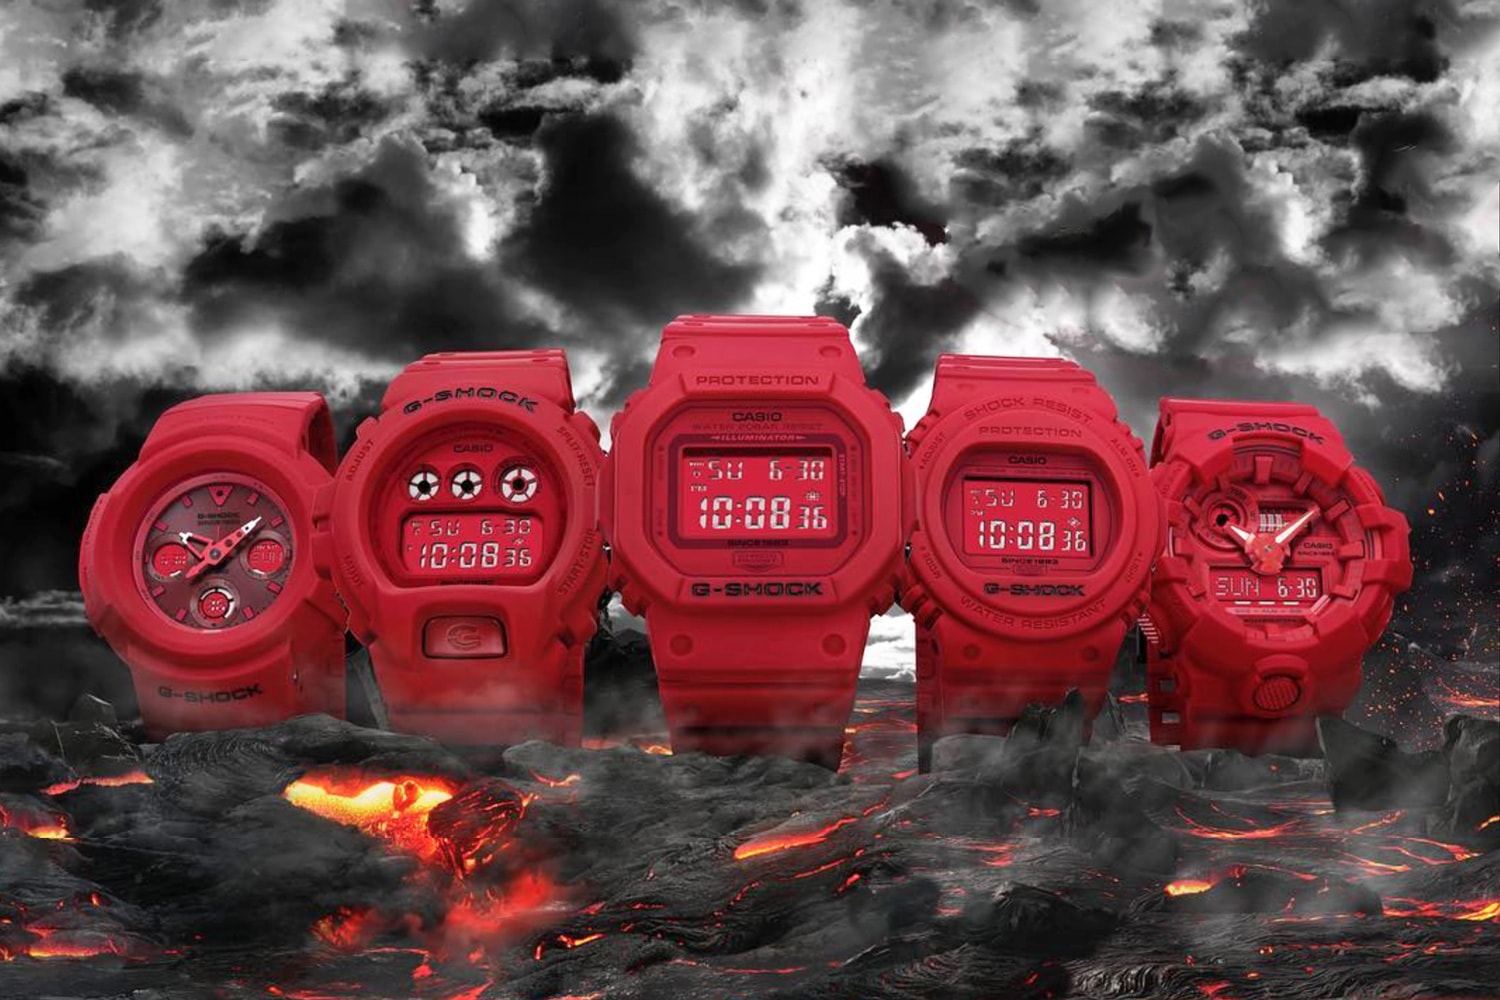 G Shock 35th Anniversary Red Out Collection Watches DW 5635C AWG M535C DW 5735C DW 6935C  GA 735C